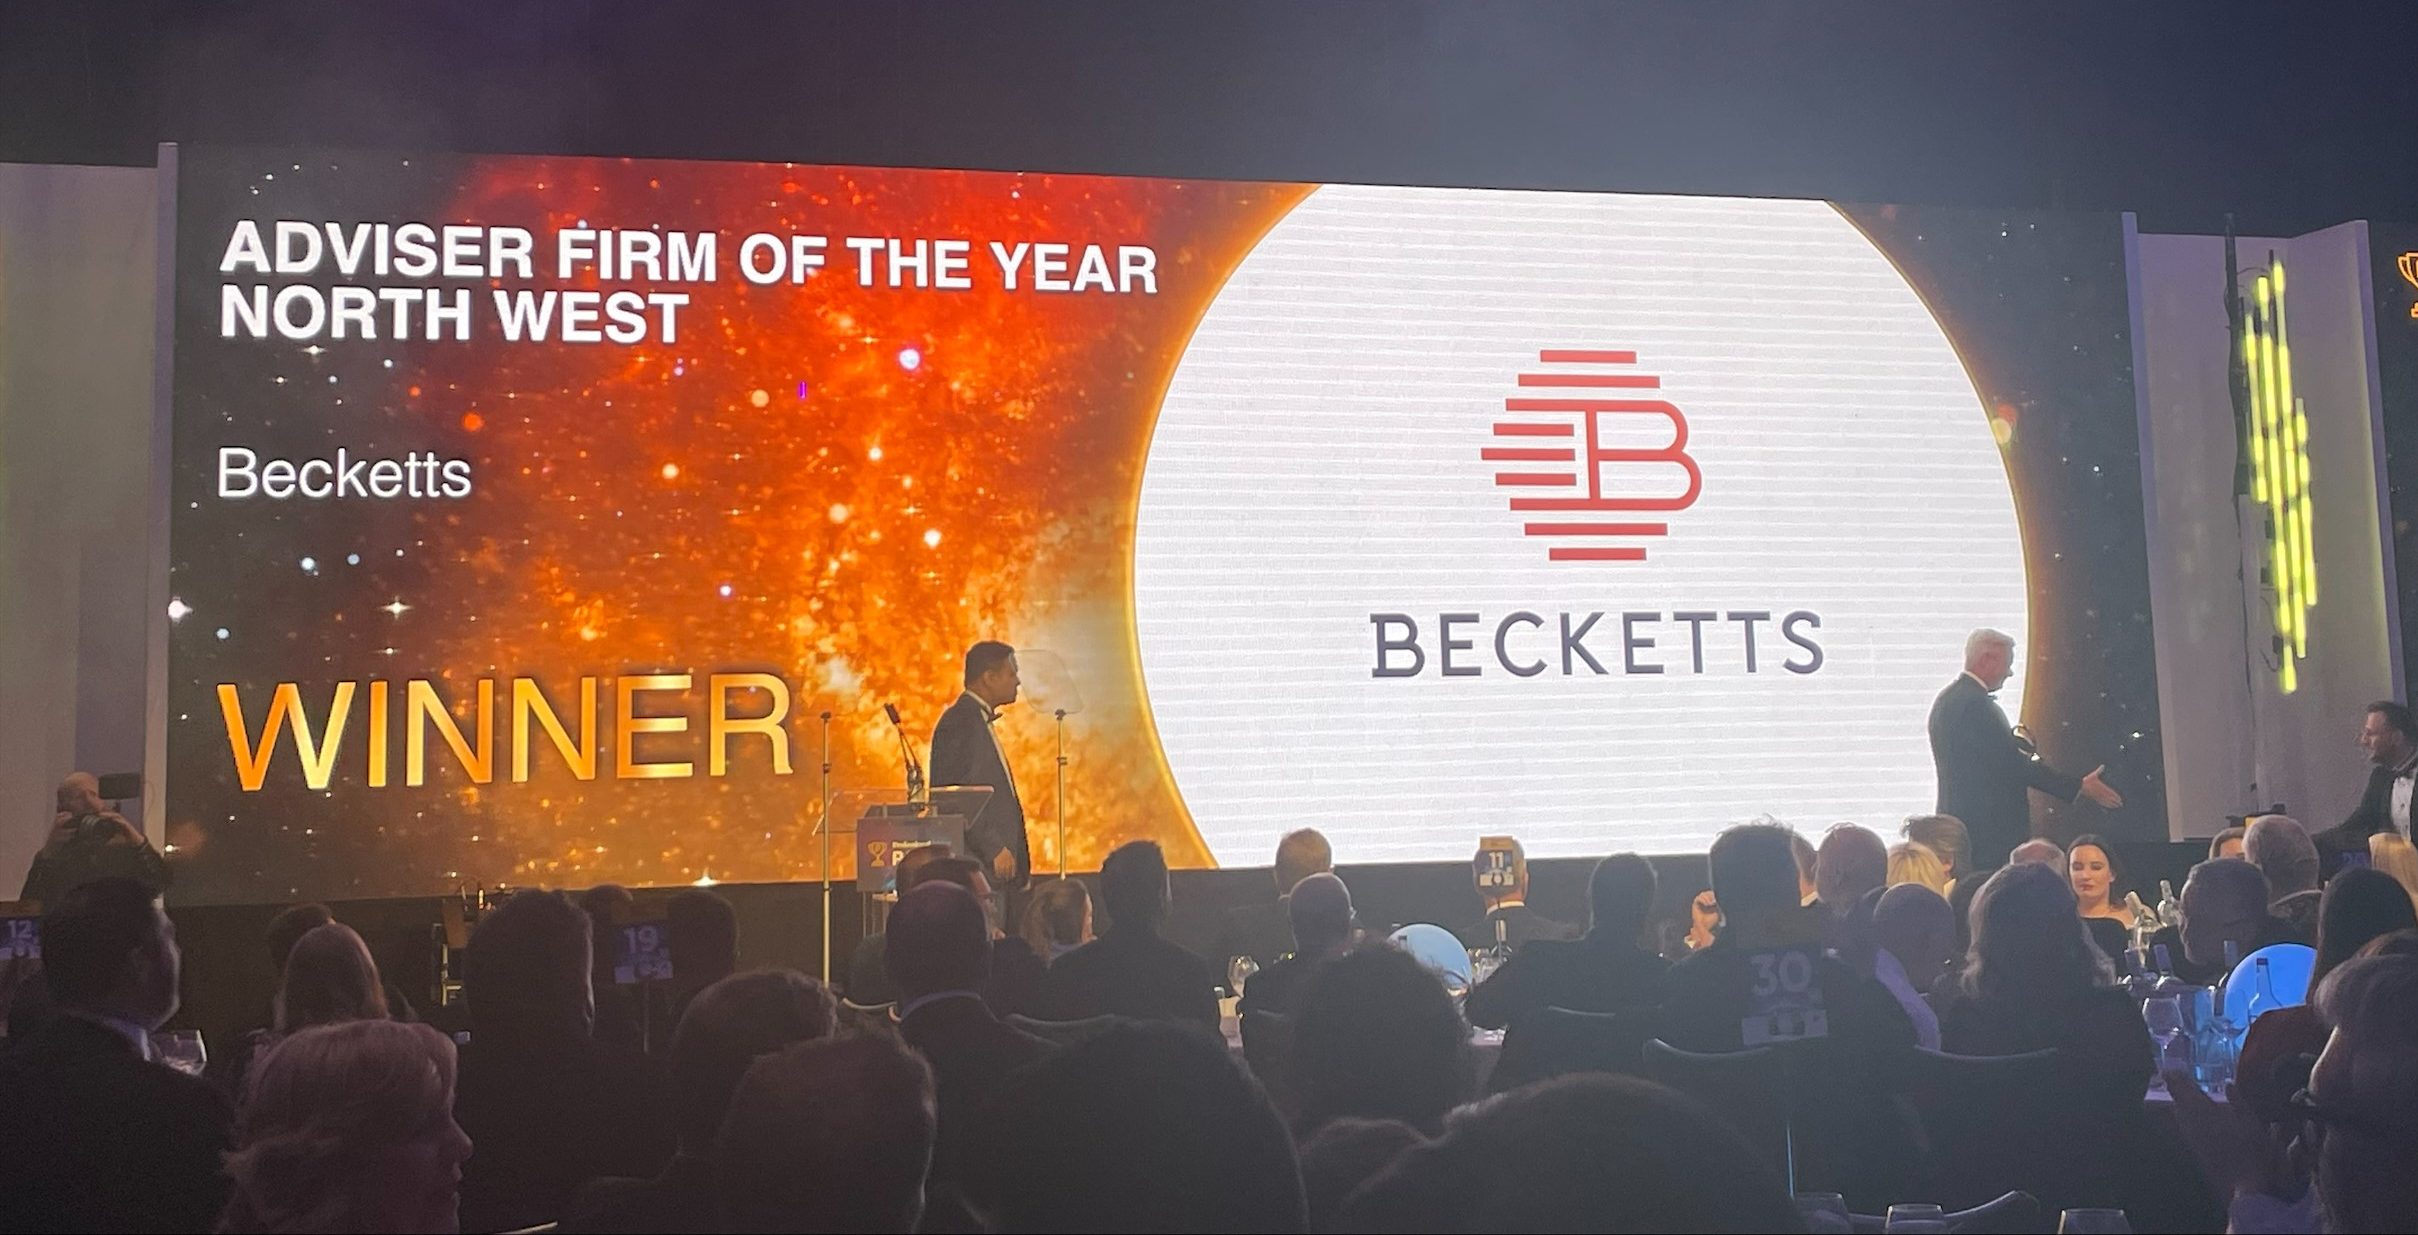 Becketts crowned double winners at the Professional Adviser Awards